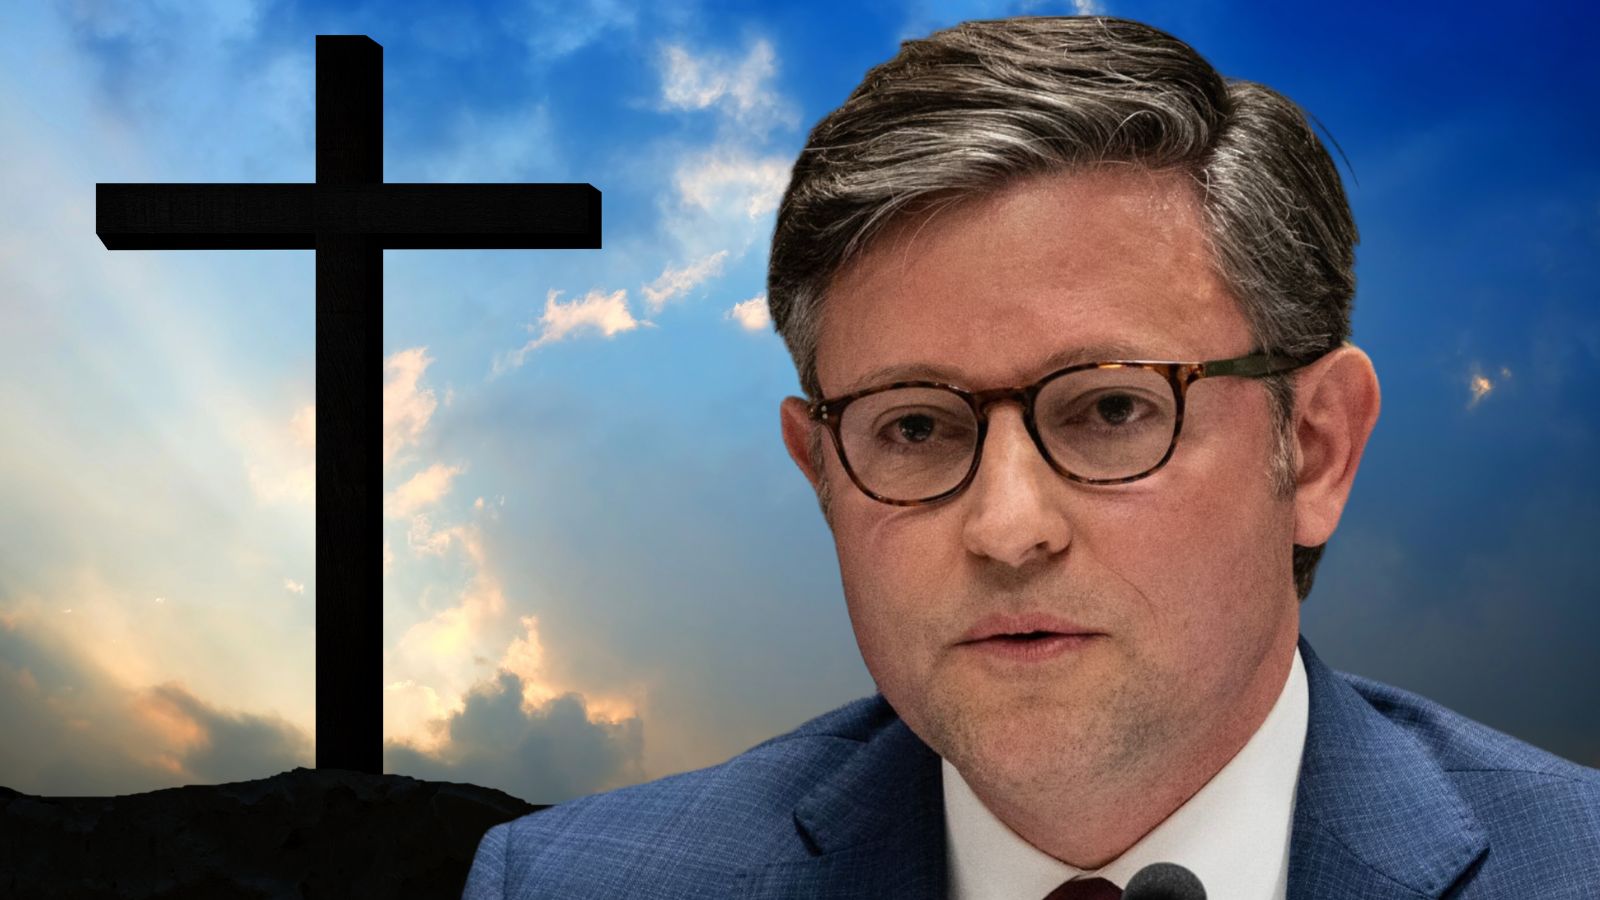 “For Him, Religion Is Just a Means to Power”: Mike Johnson’s Legal History Reveals Special Treatment Given To Evangelical Christianity